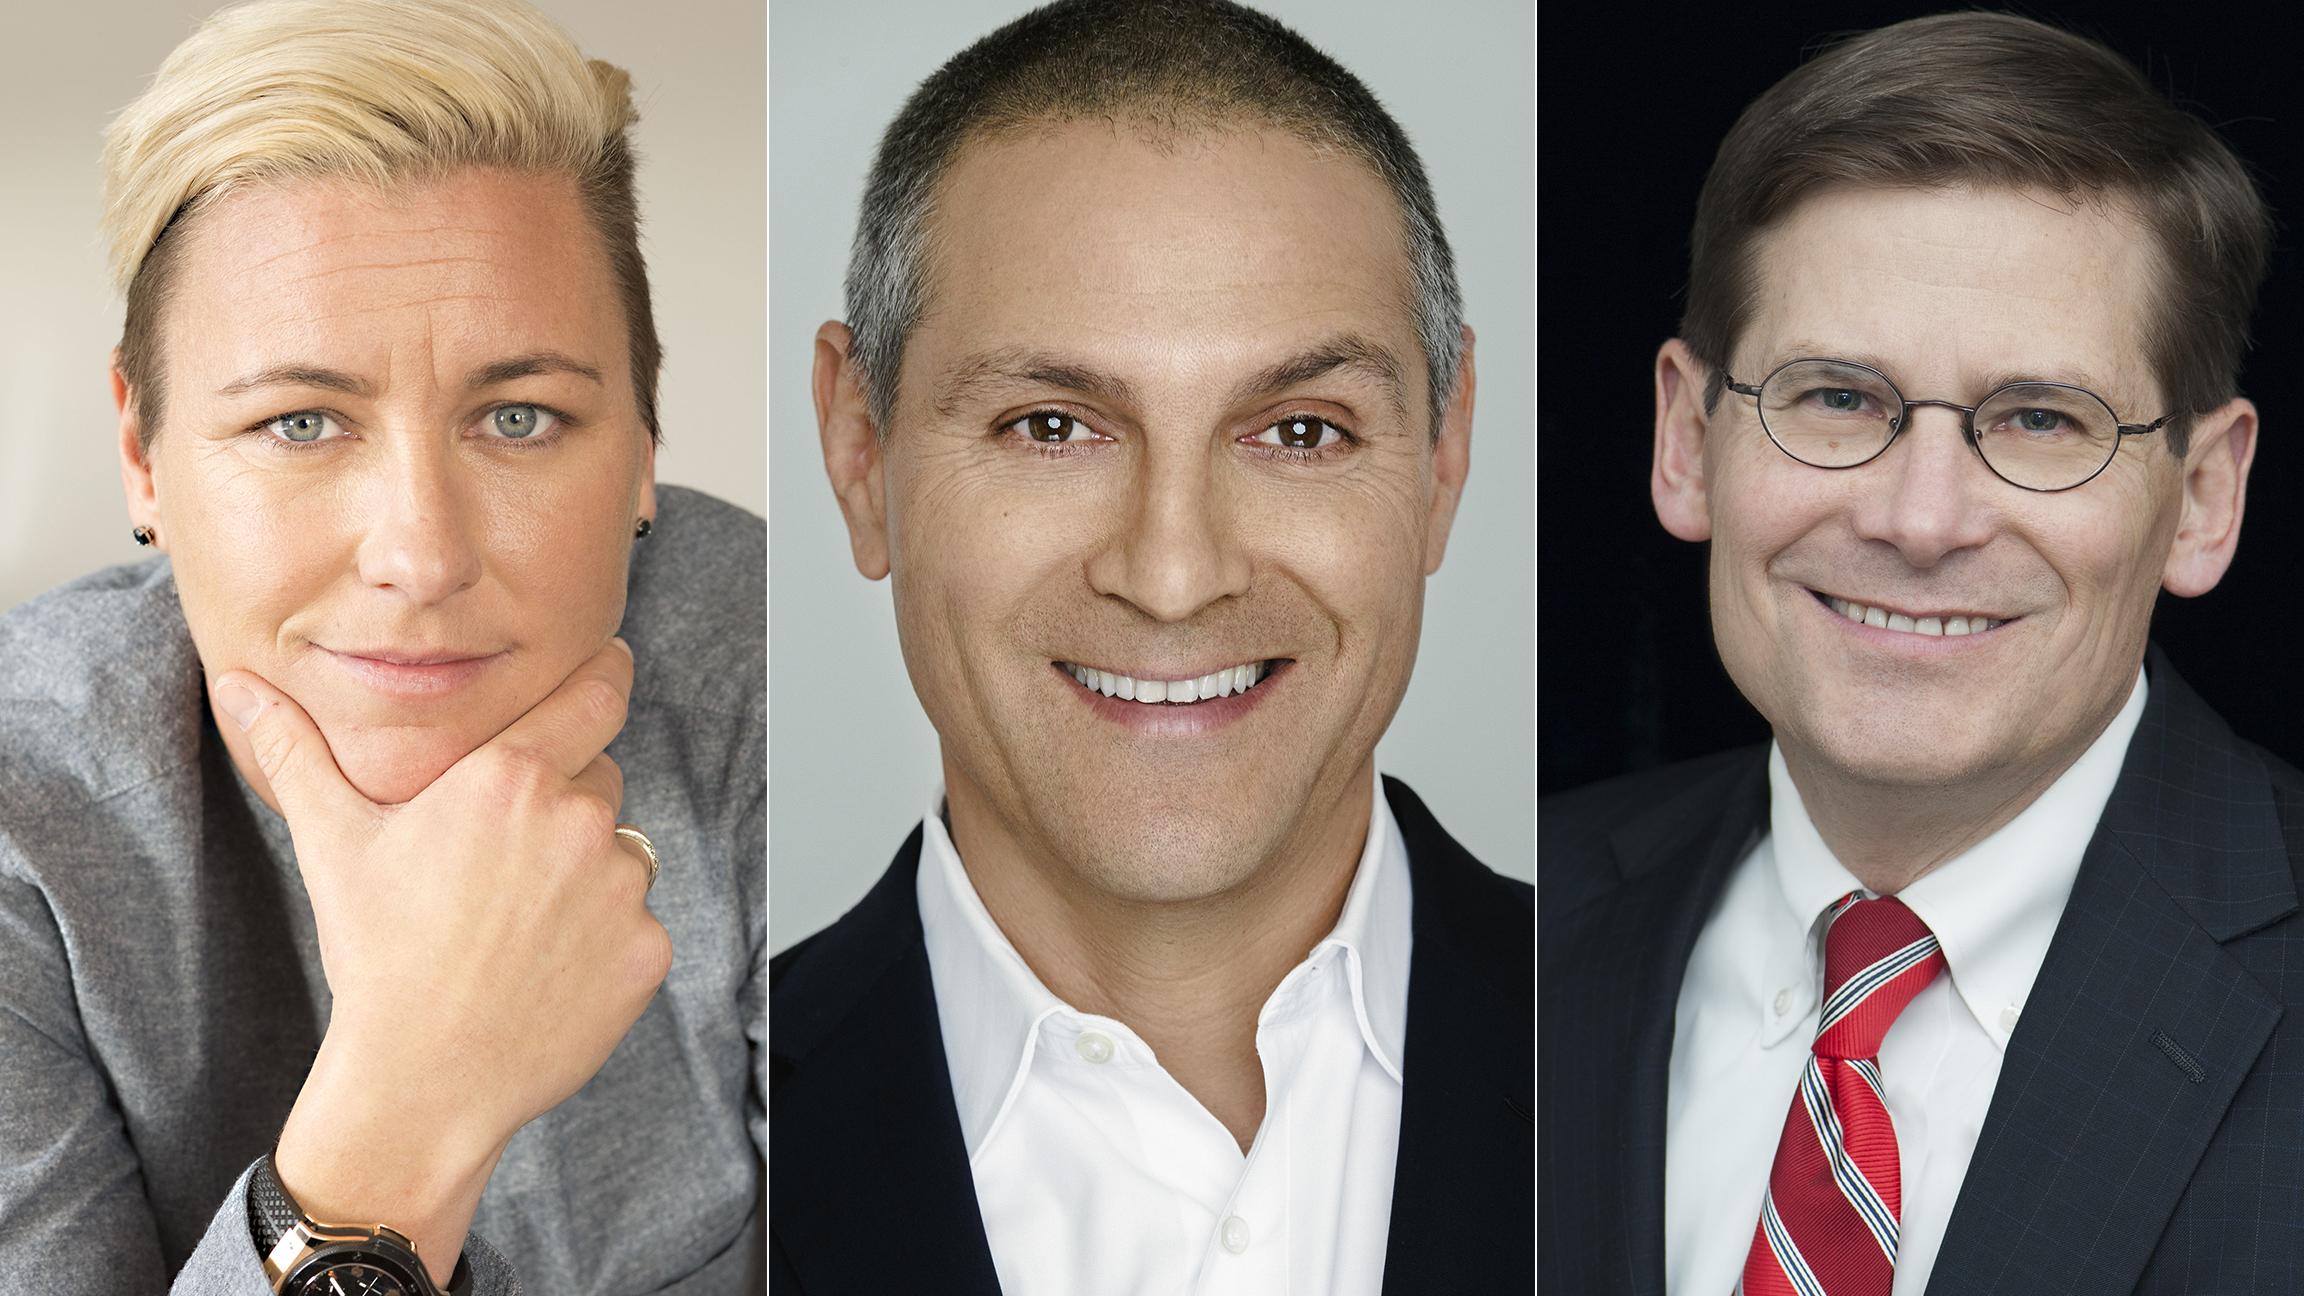 From left: Abby Wambach, Ari Emanuel and Michael Morell take part in this year's Chicago Ideas Week. (Courtesy of Chicago Ideas Week)